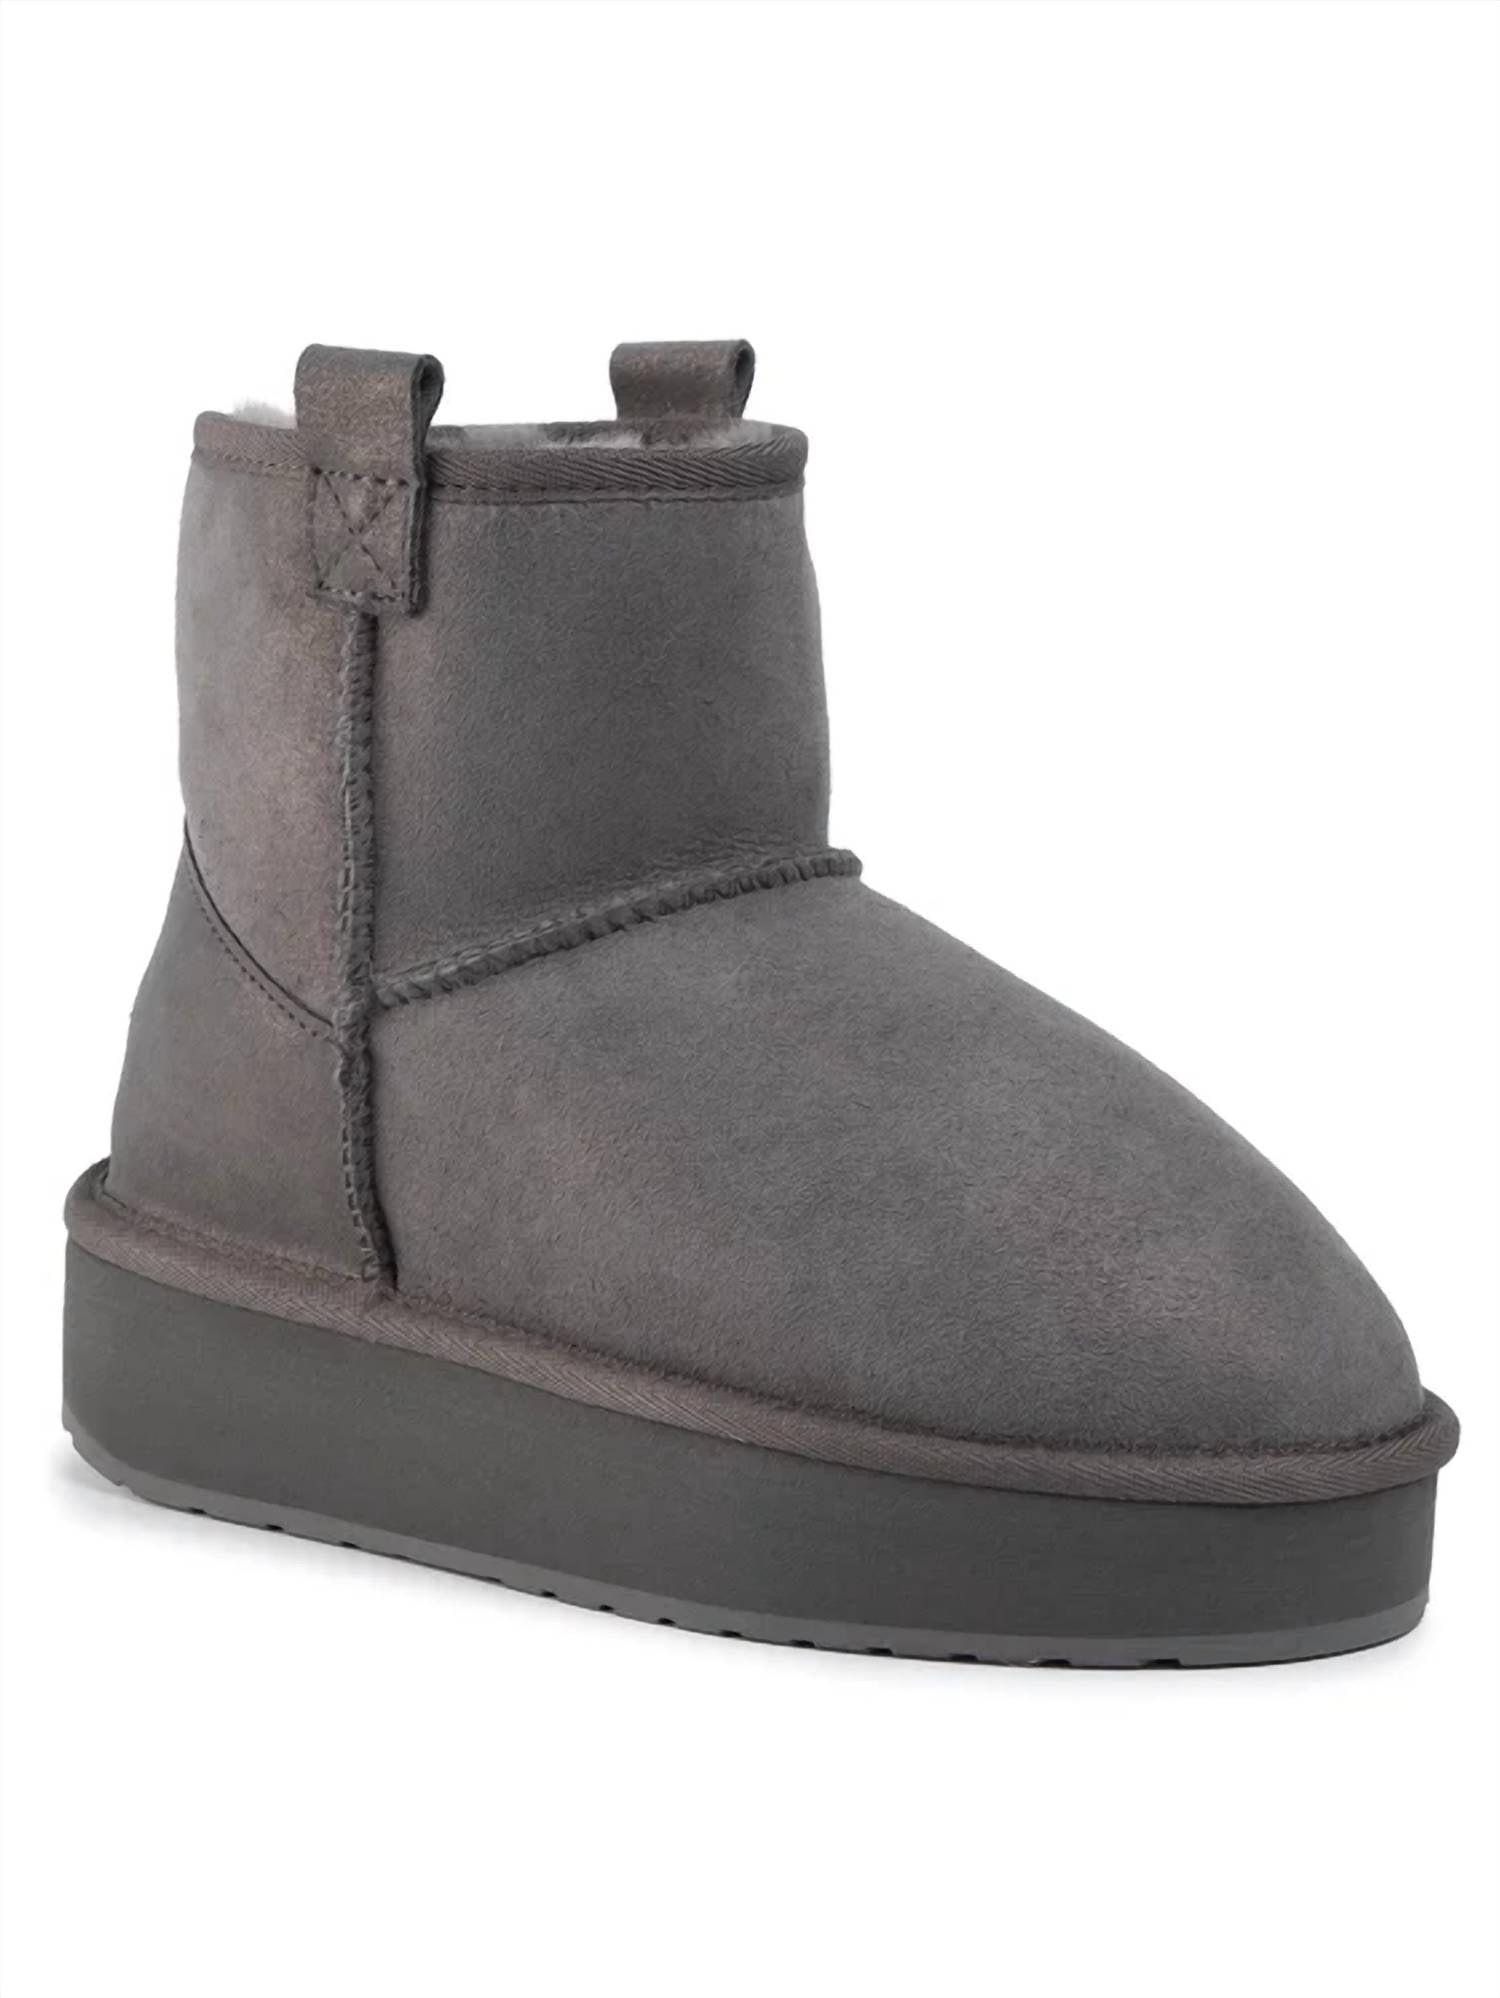 EMU Foy Platform Micro Boot In Charcoal in Gray | Lyst